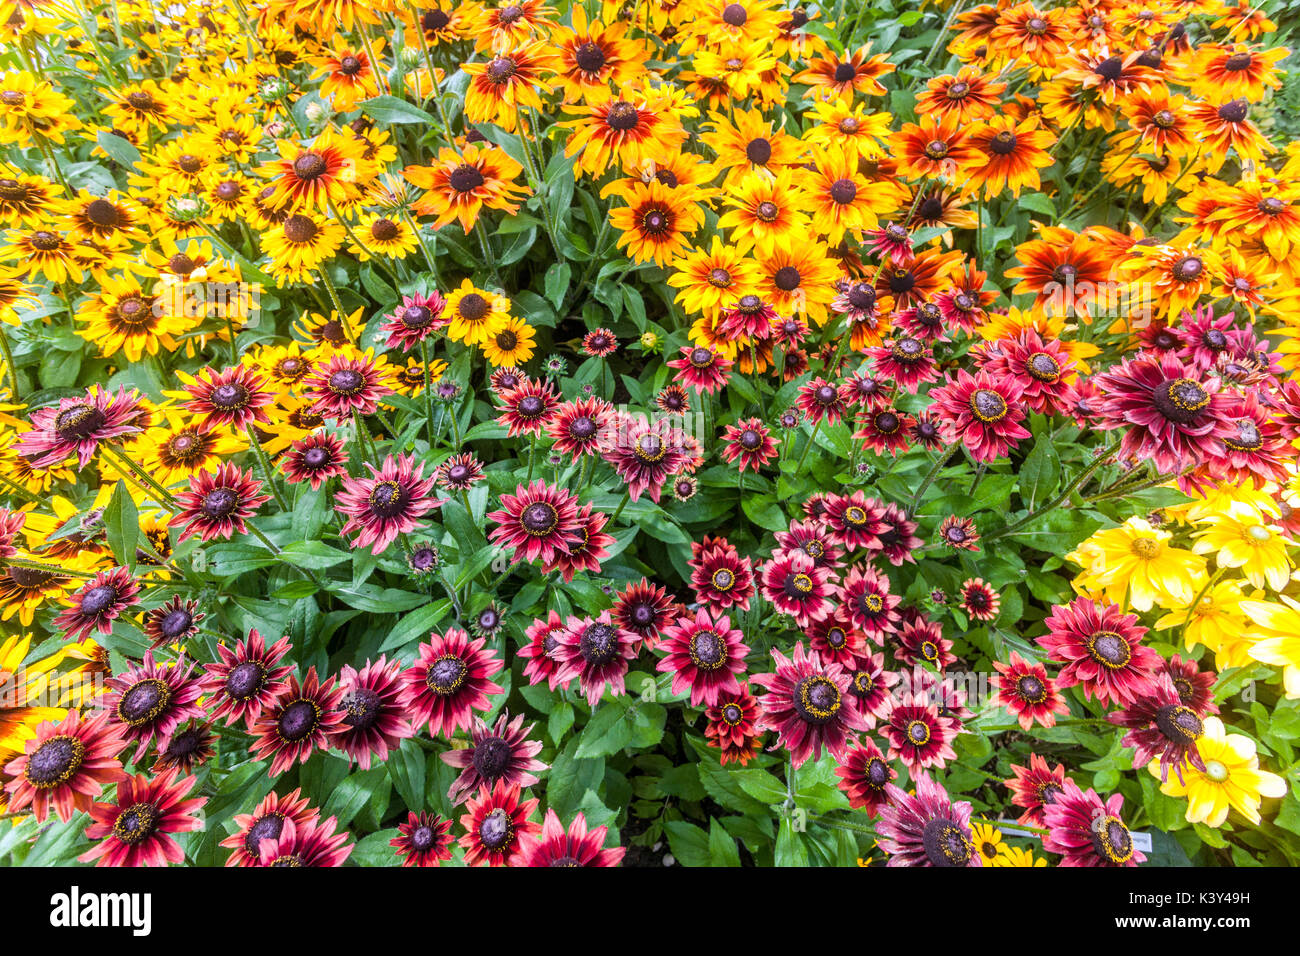 Red Rudbeckia Cherry Brandy flowers and others Rudbeckias, Summer garden  flowerbed Black-Eyed Susan Stock Photo - Alamy